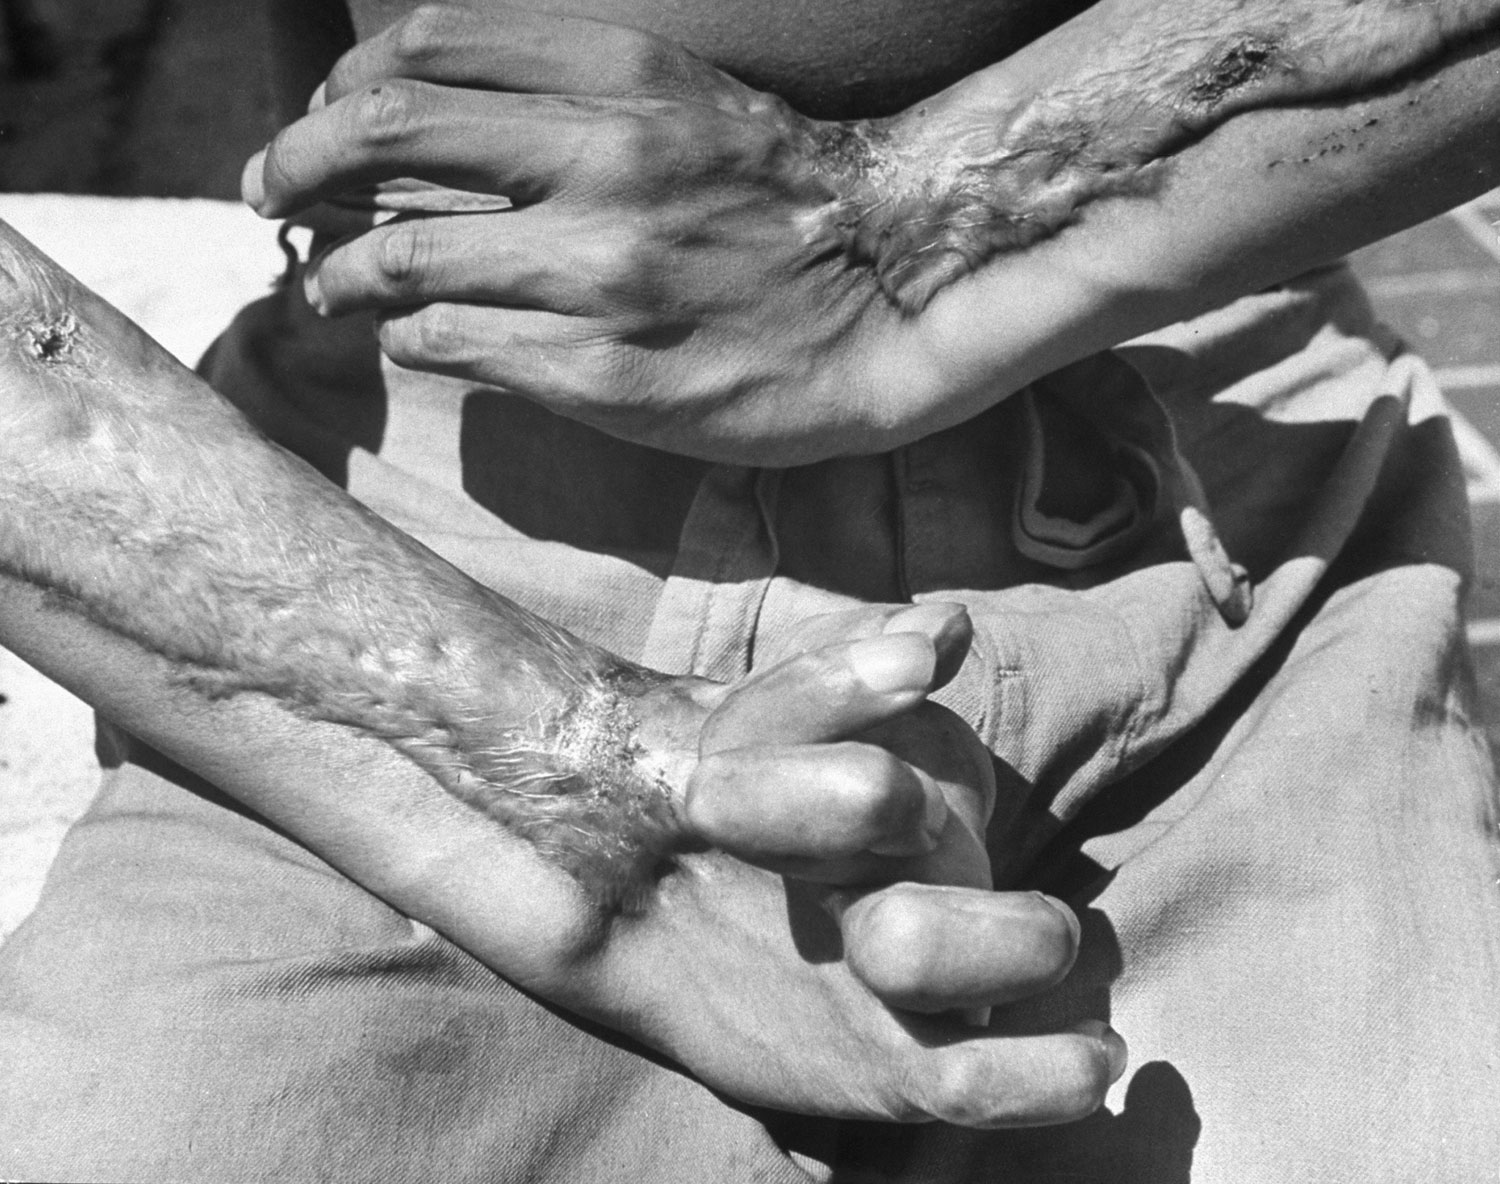 A survivor of the United States' atomic attack on Hiroshima, still hospitalized two years later, shows the damage to his hands, 1947.